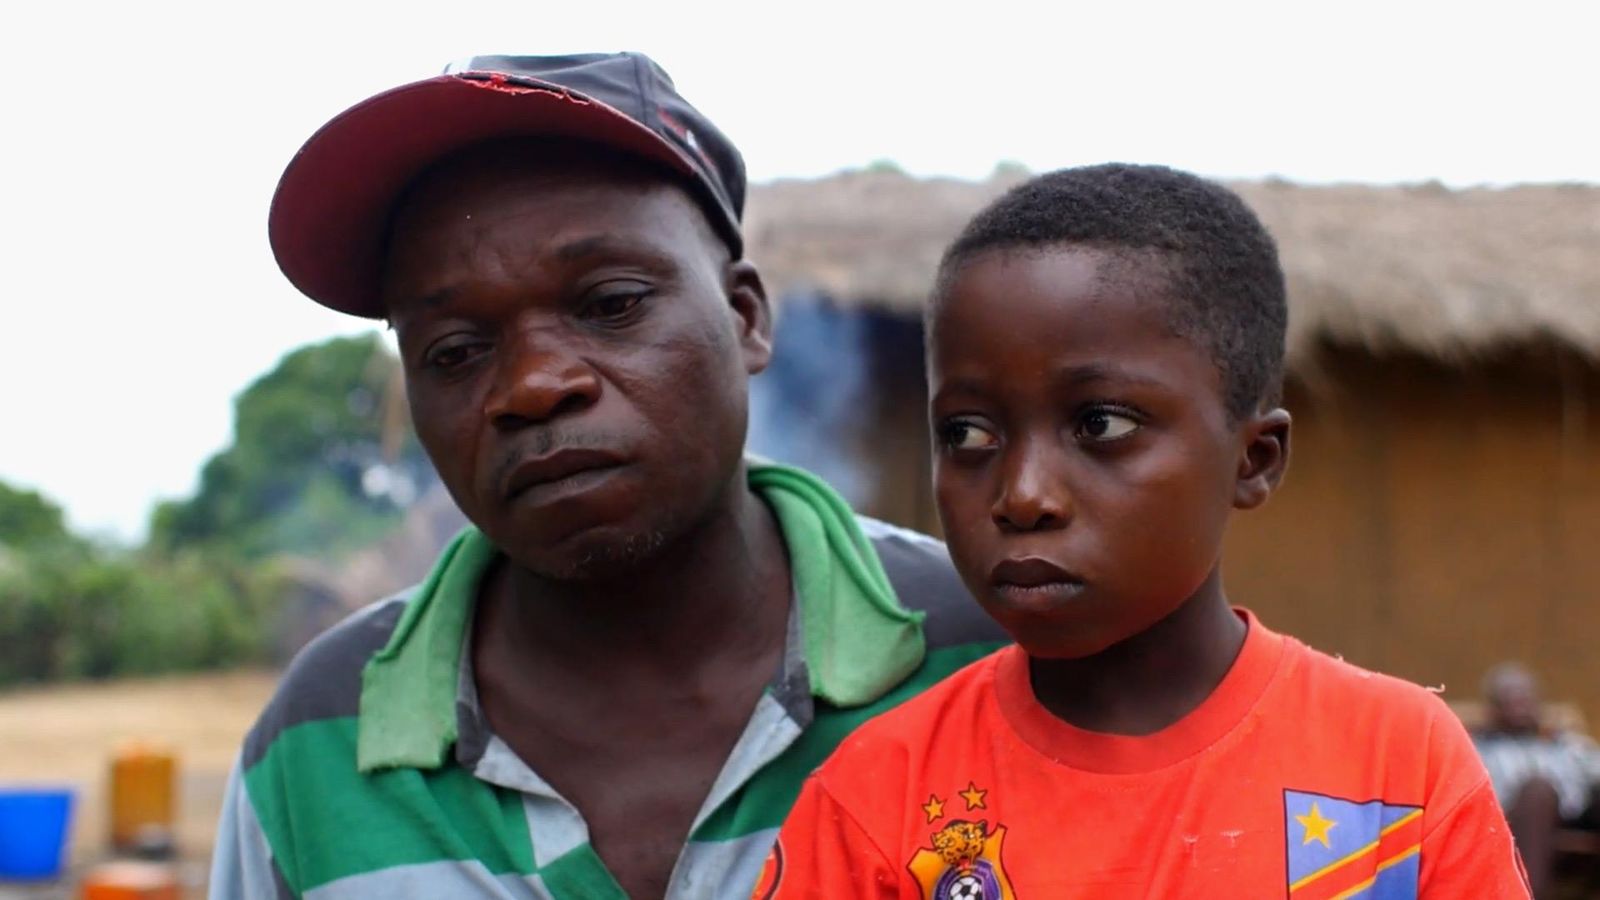 Guy, 12 with his father, is the first child to receive an innovative oral treatment for sleeping sickness, in his hometown Mushie in the Democratic Republic of Congo